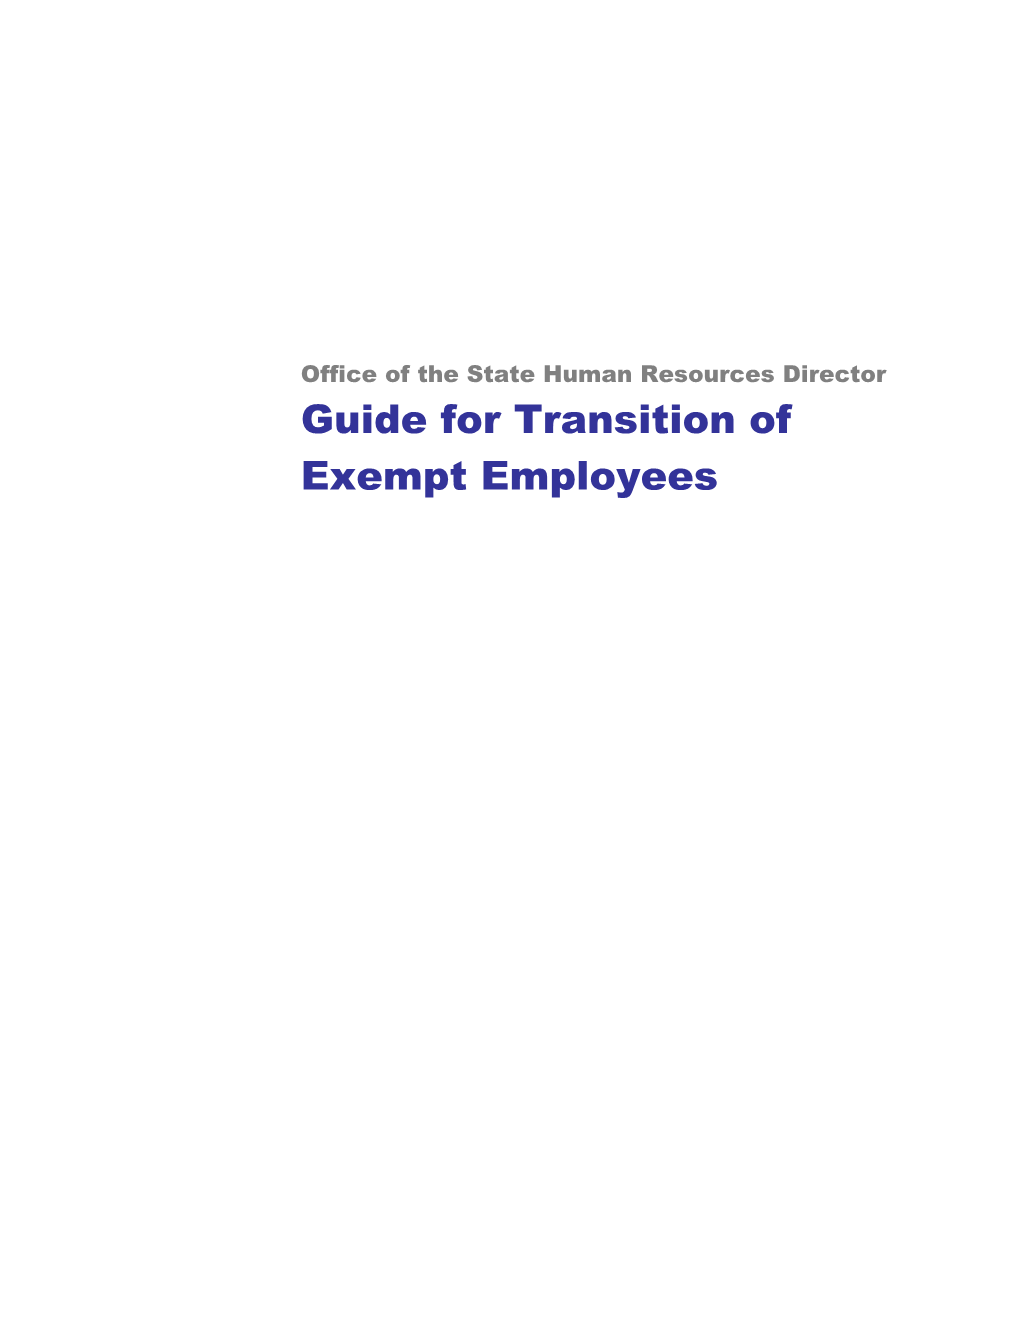 Transition Guide for Exempt Employees s1